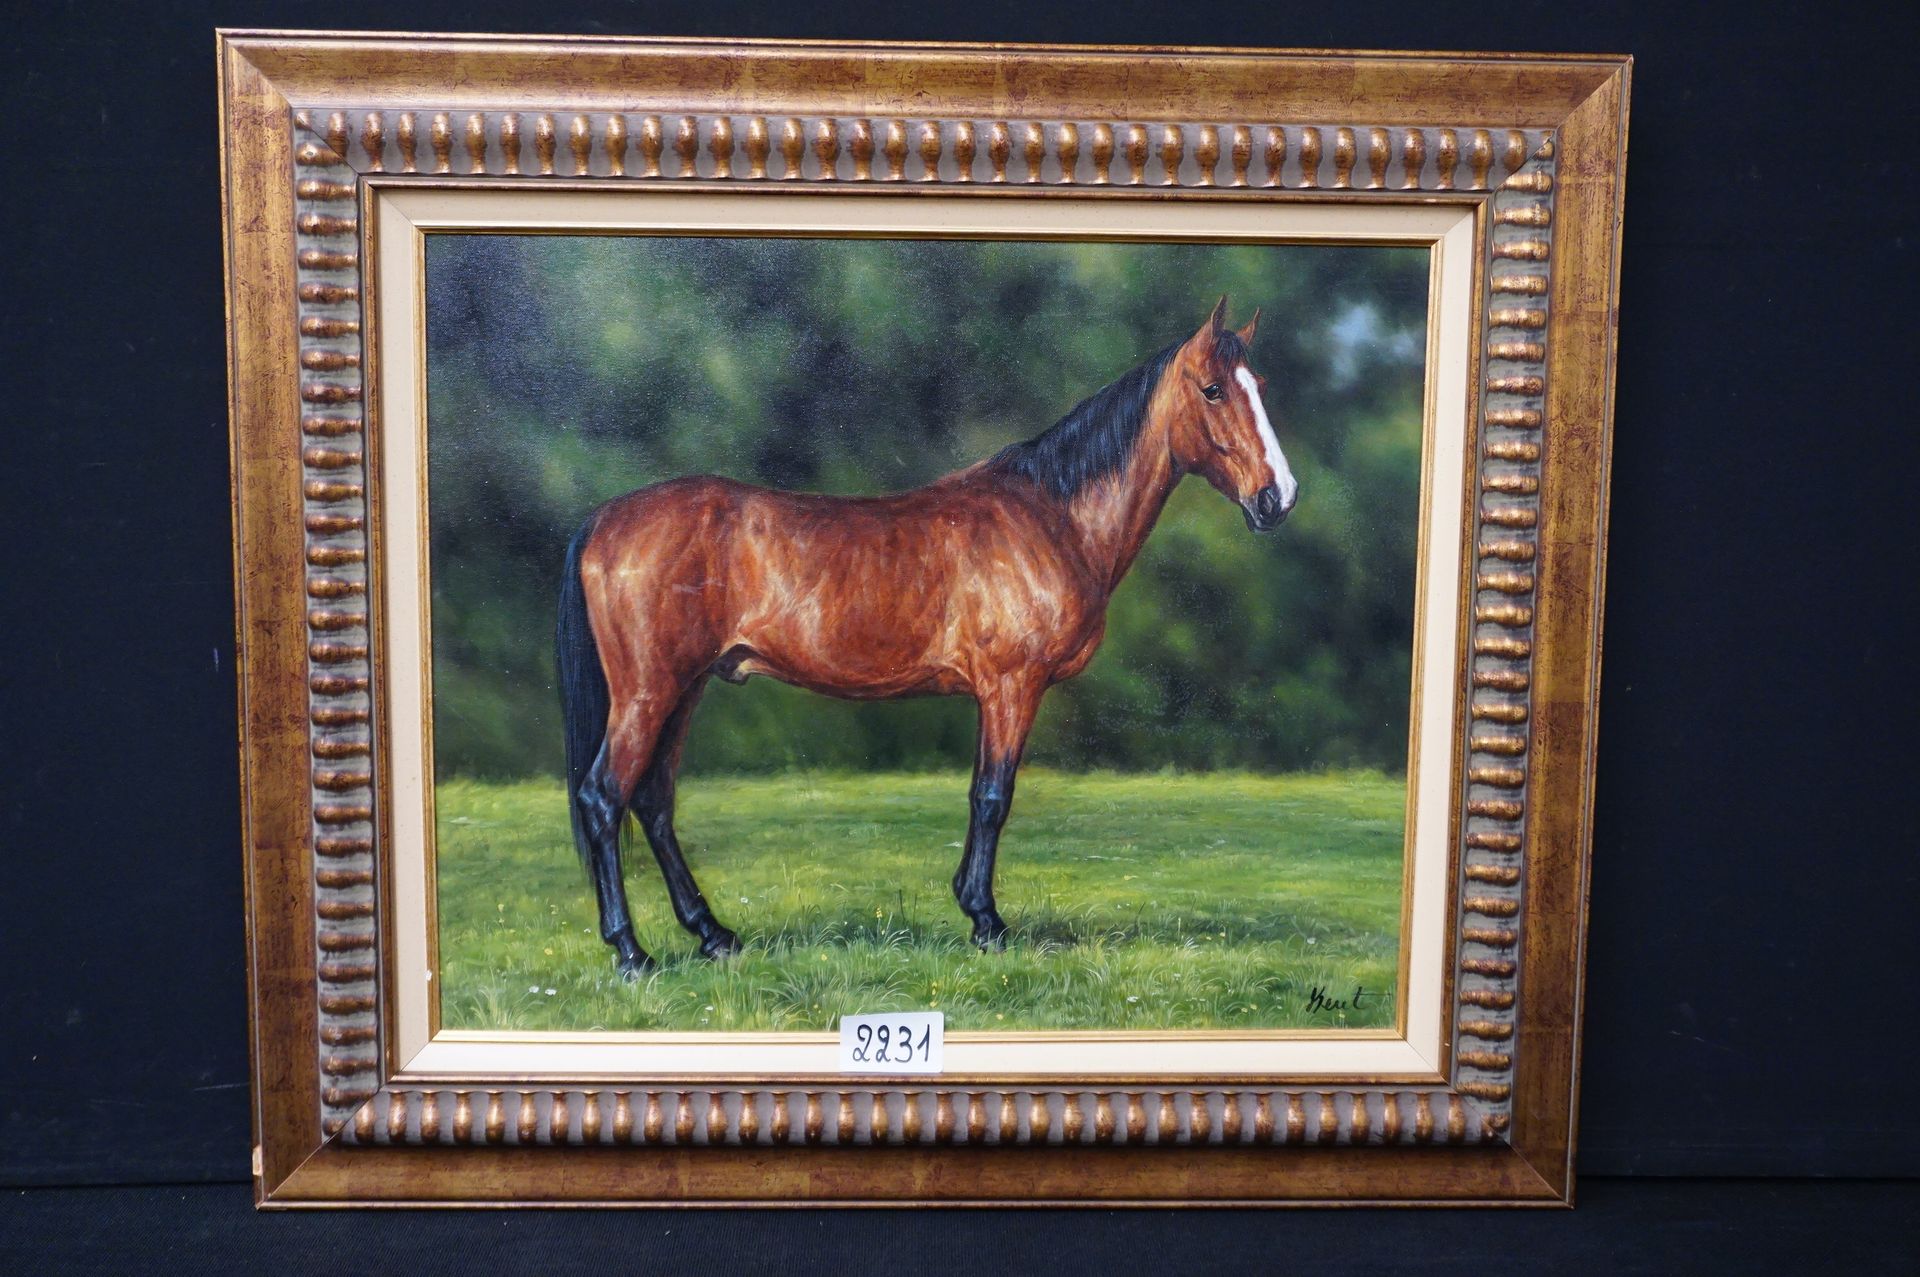 KENT "Horse - Arabian thoroughbred" - Oil on canvas - Signed - 50 x 60 cm